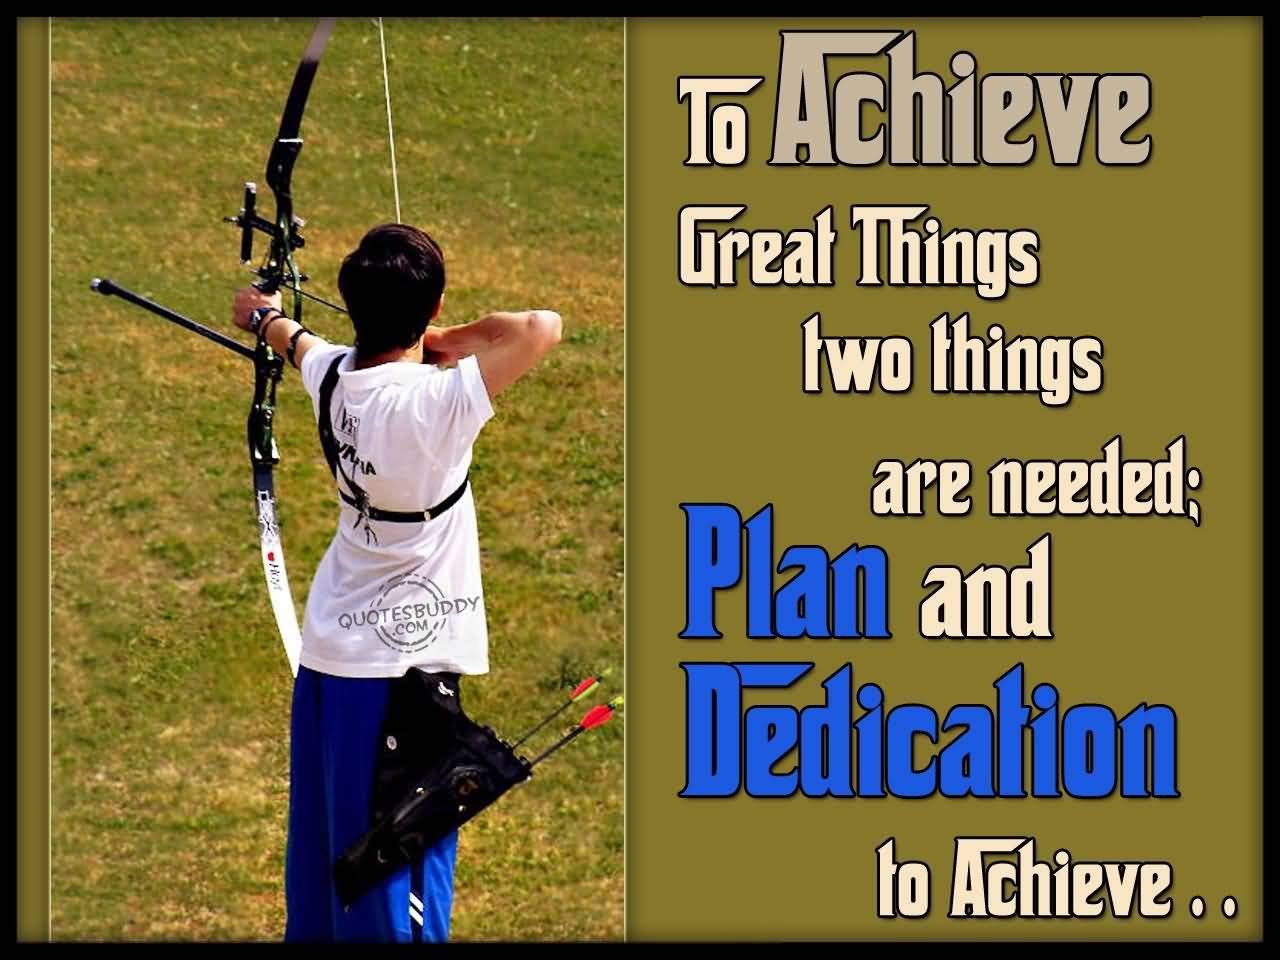 To achieve great things, two things are needed, plan, and dedication to achieve